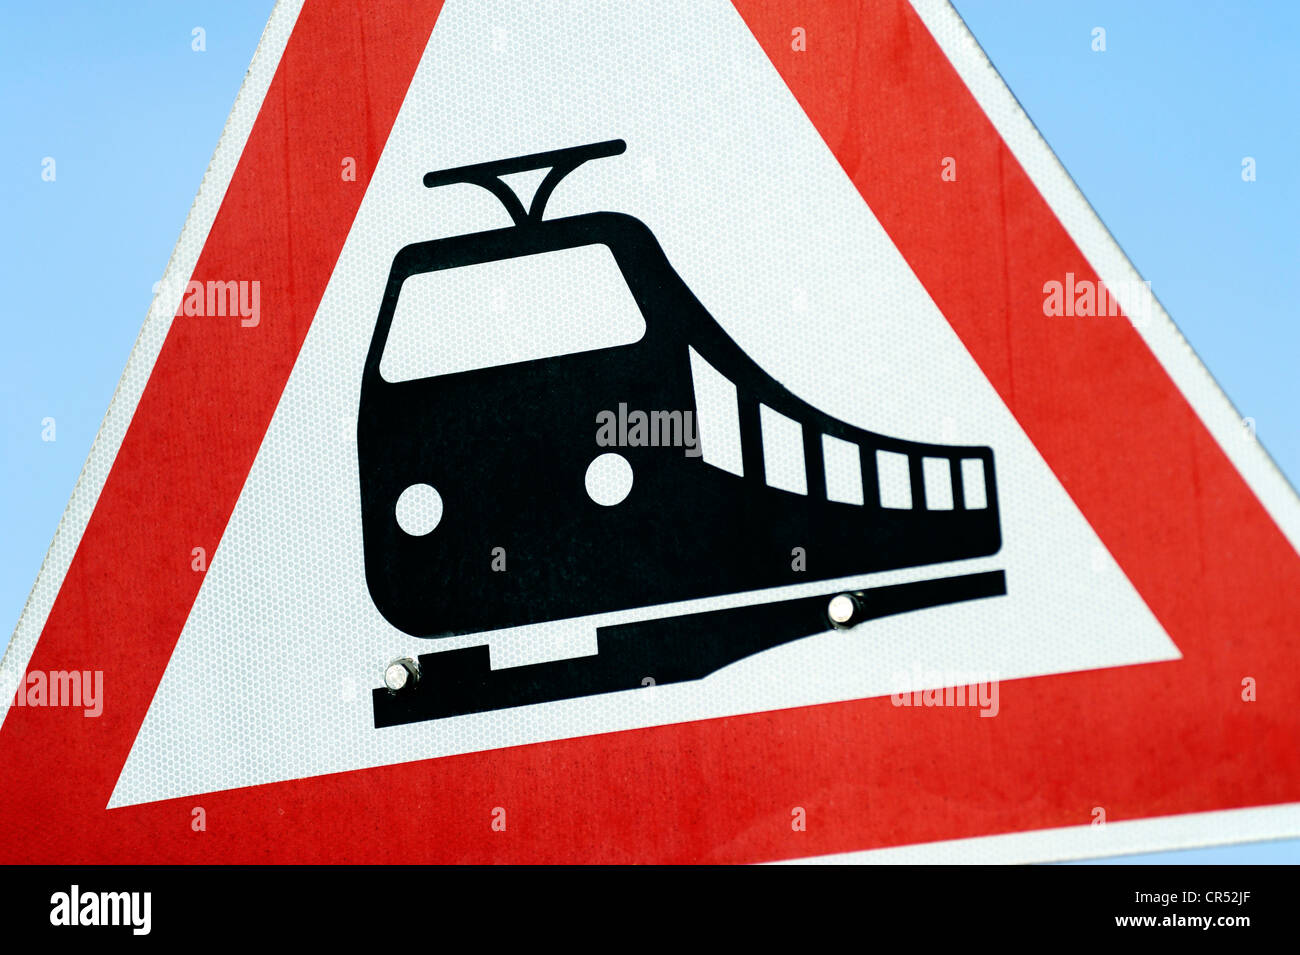 Level Crossing Road Sign High Resolution Stock Photography And Images Alamy